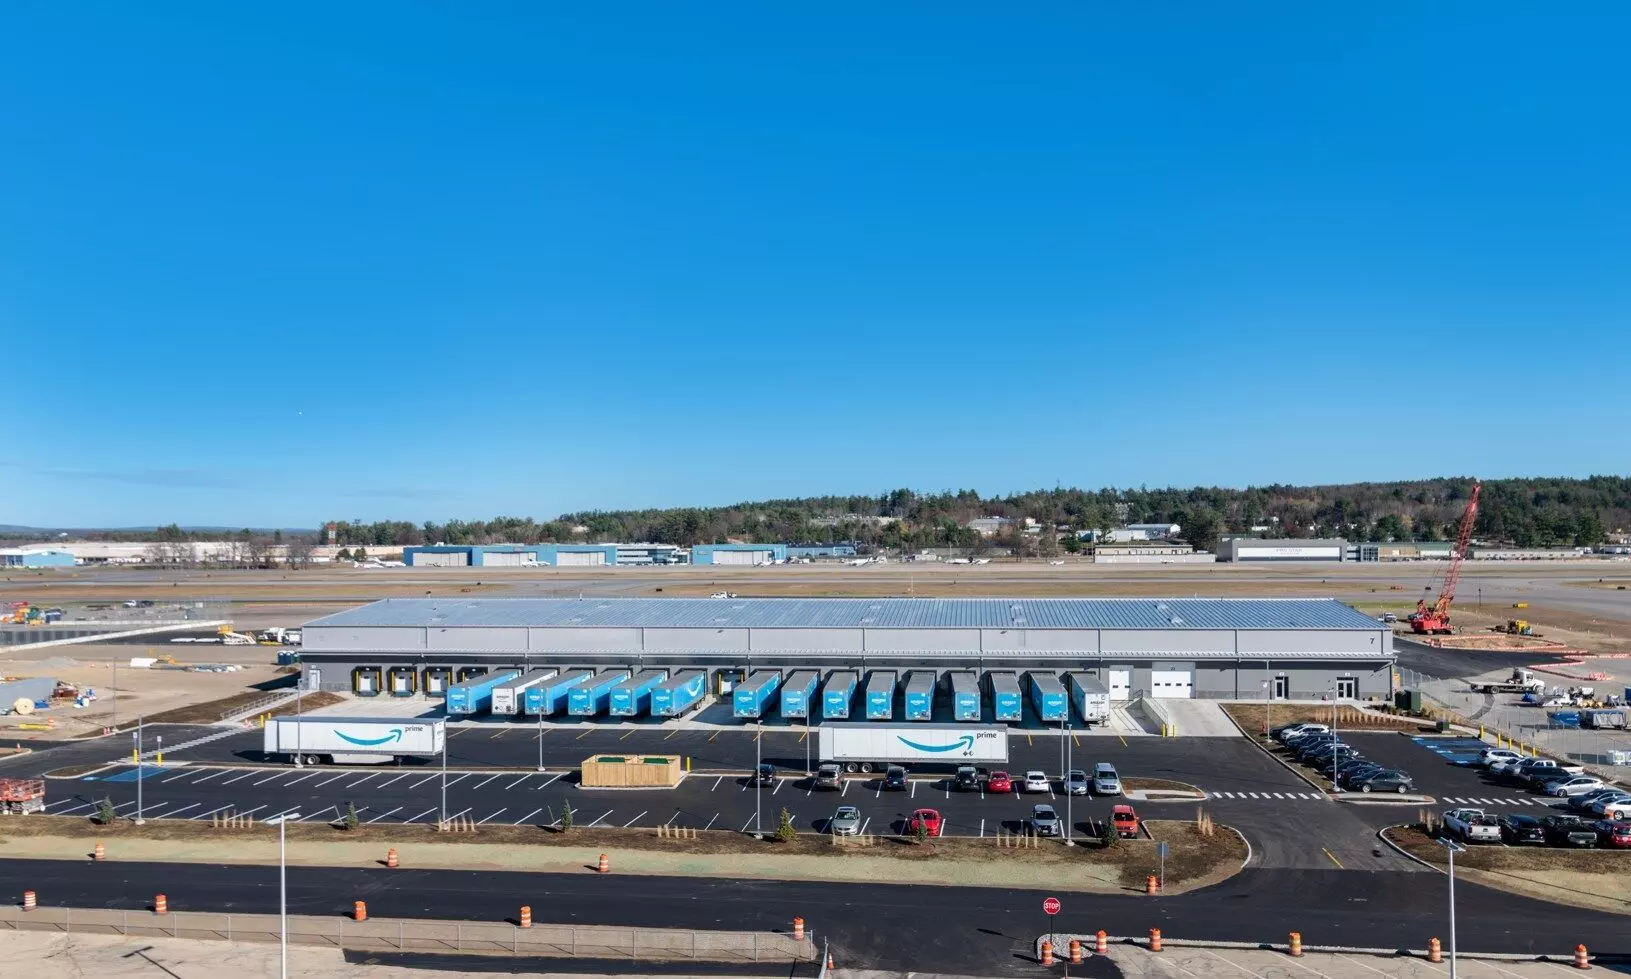 Amazon begins daily cargo service at Manchester-Boston Regional Airport